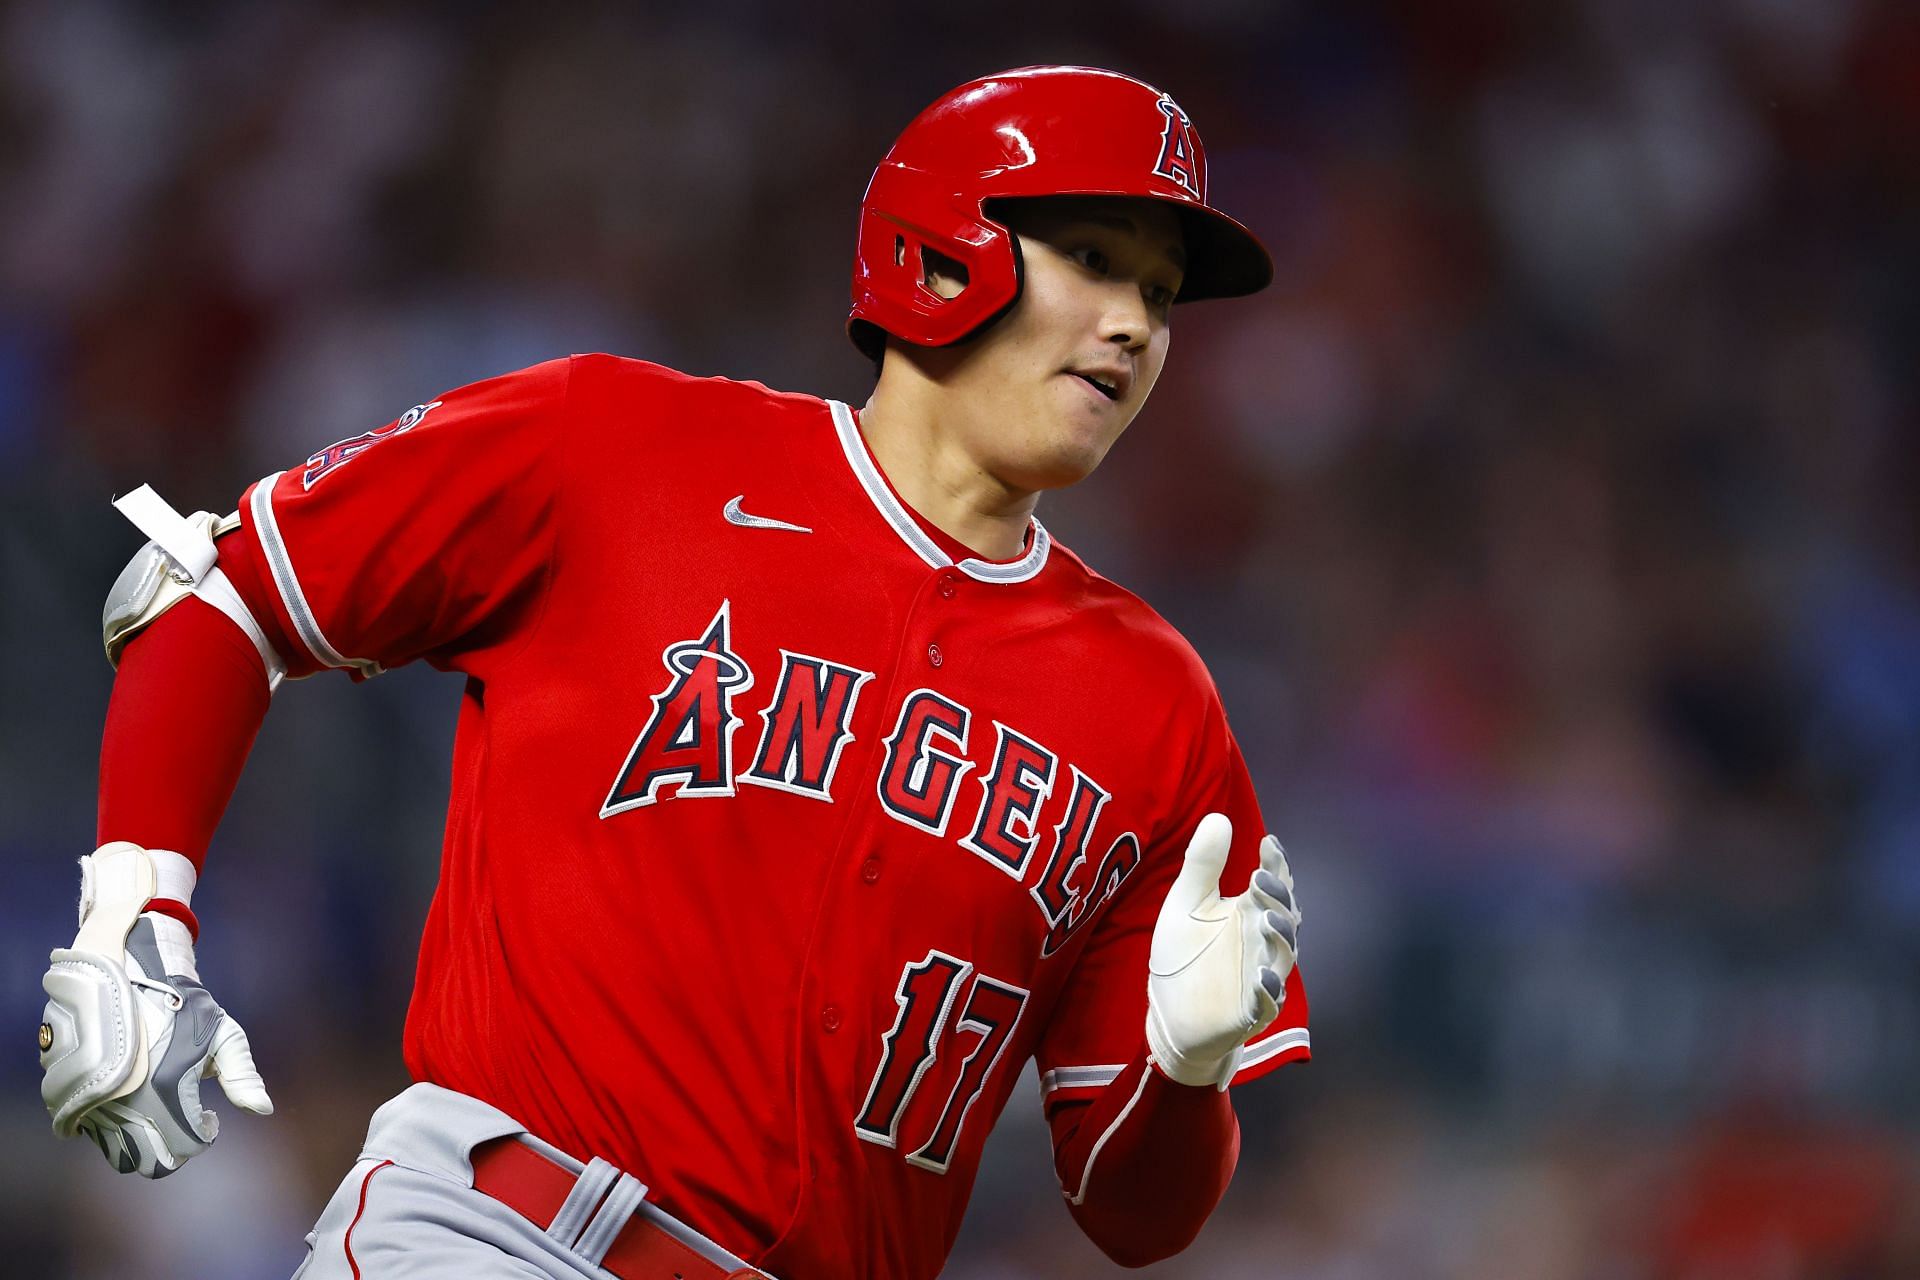 Ohtani has launched 20 home runs on the year.